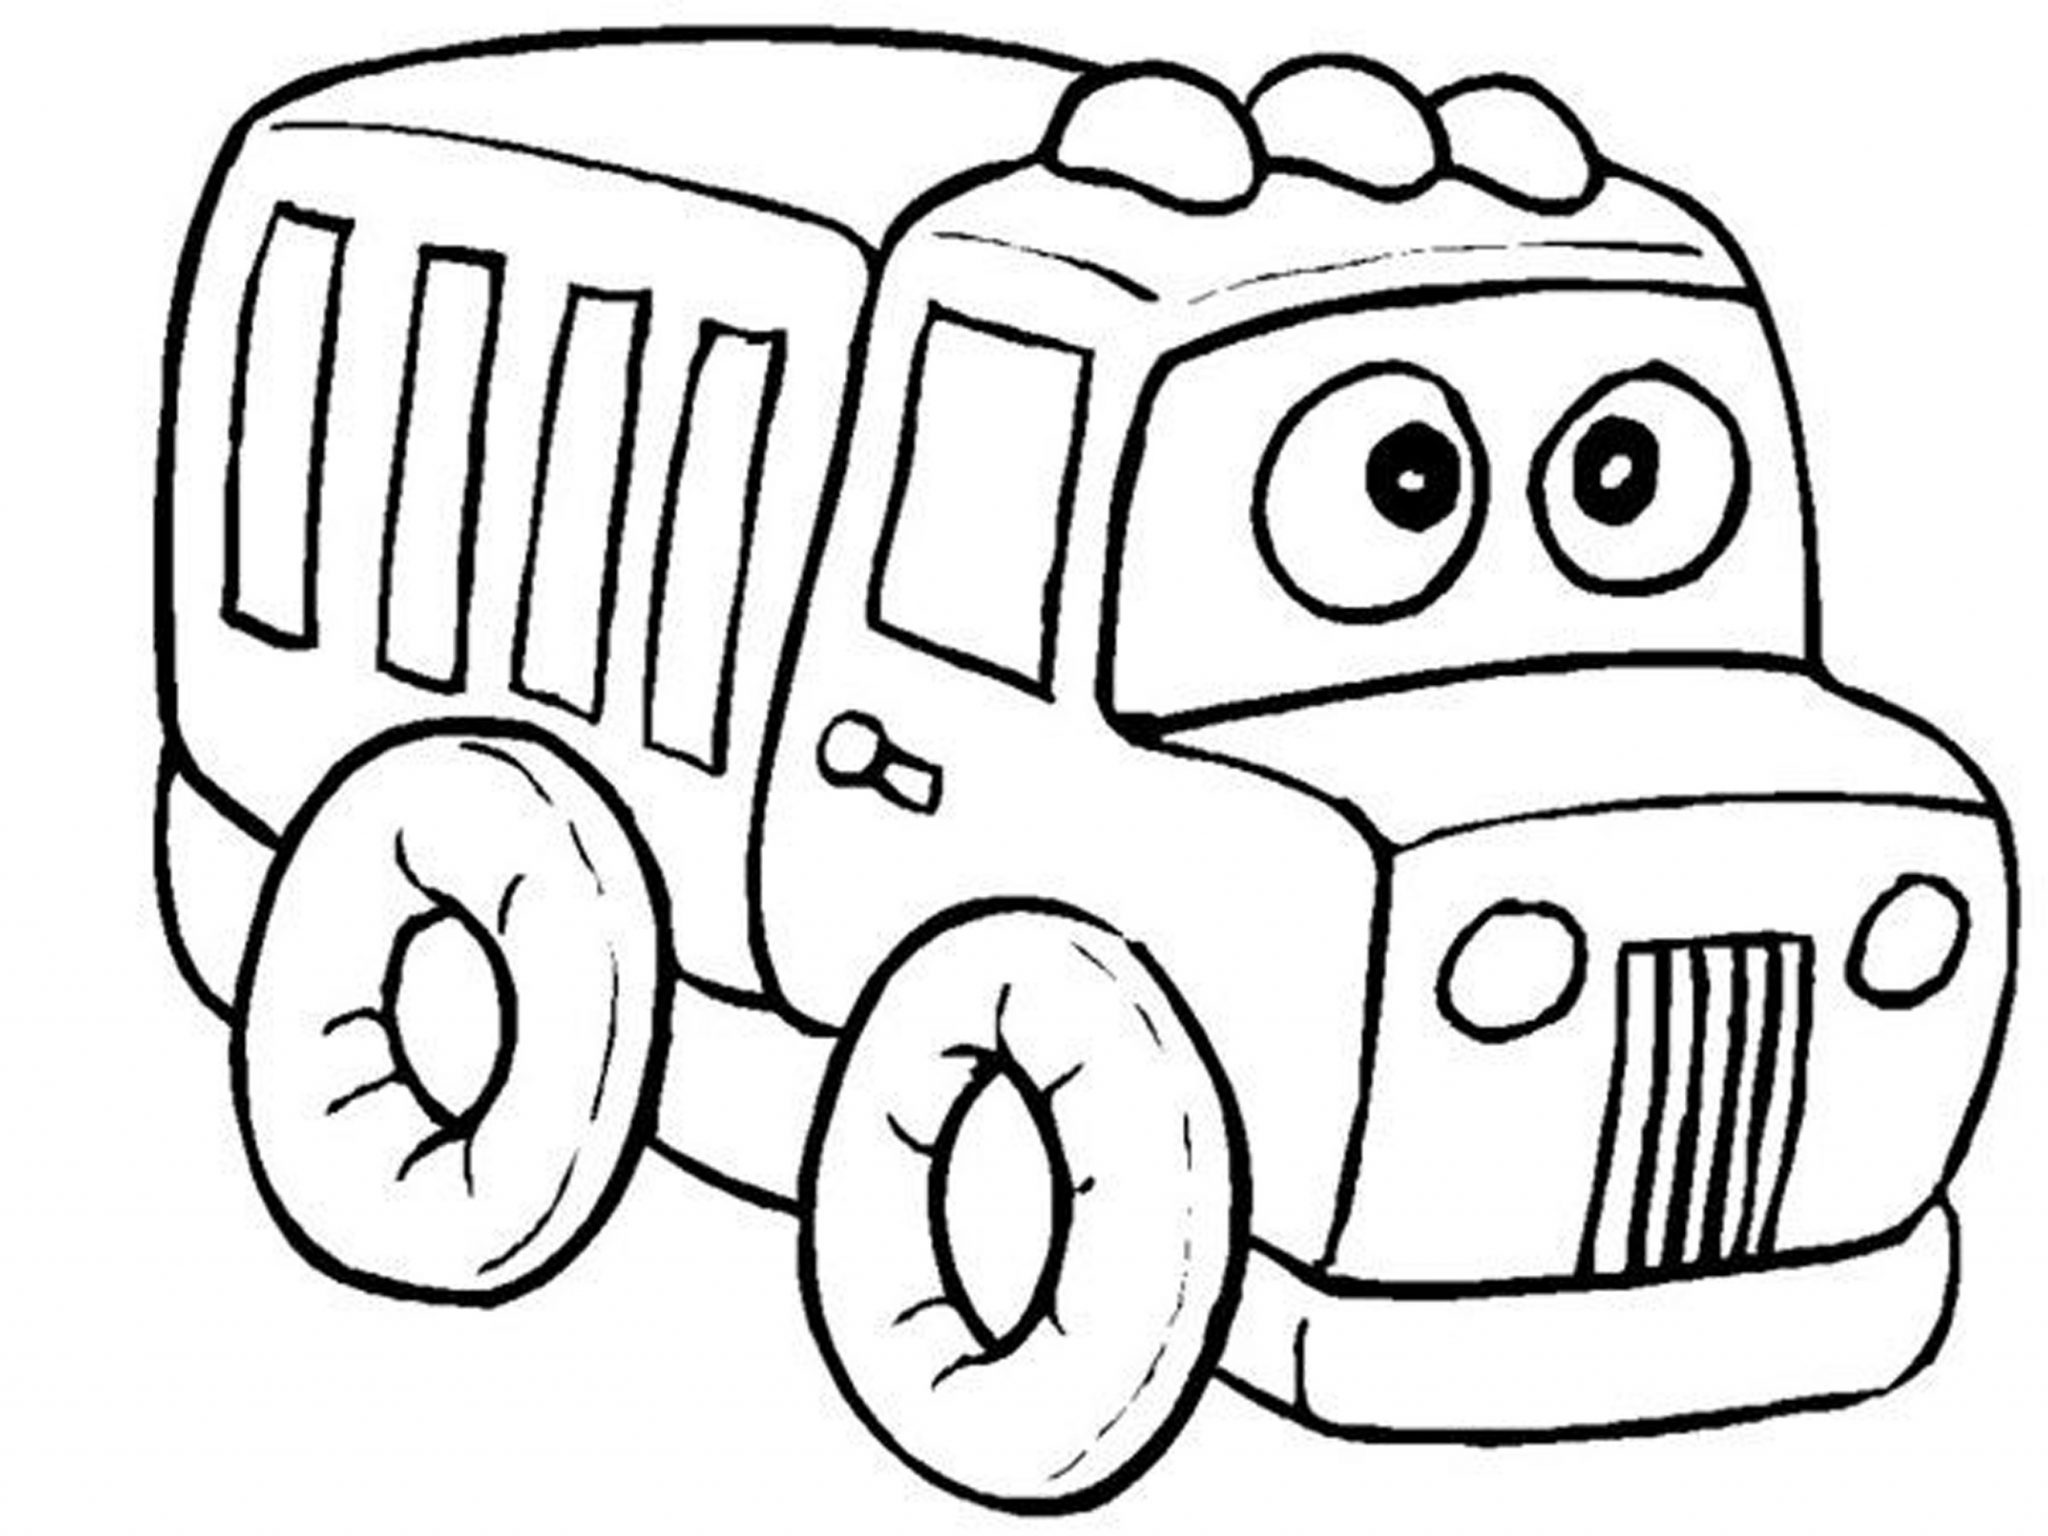 Coloring Pages for Boys & Training Shopping For Children ...